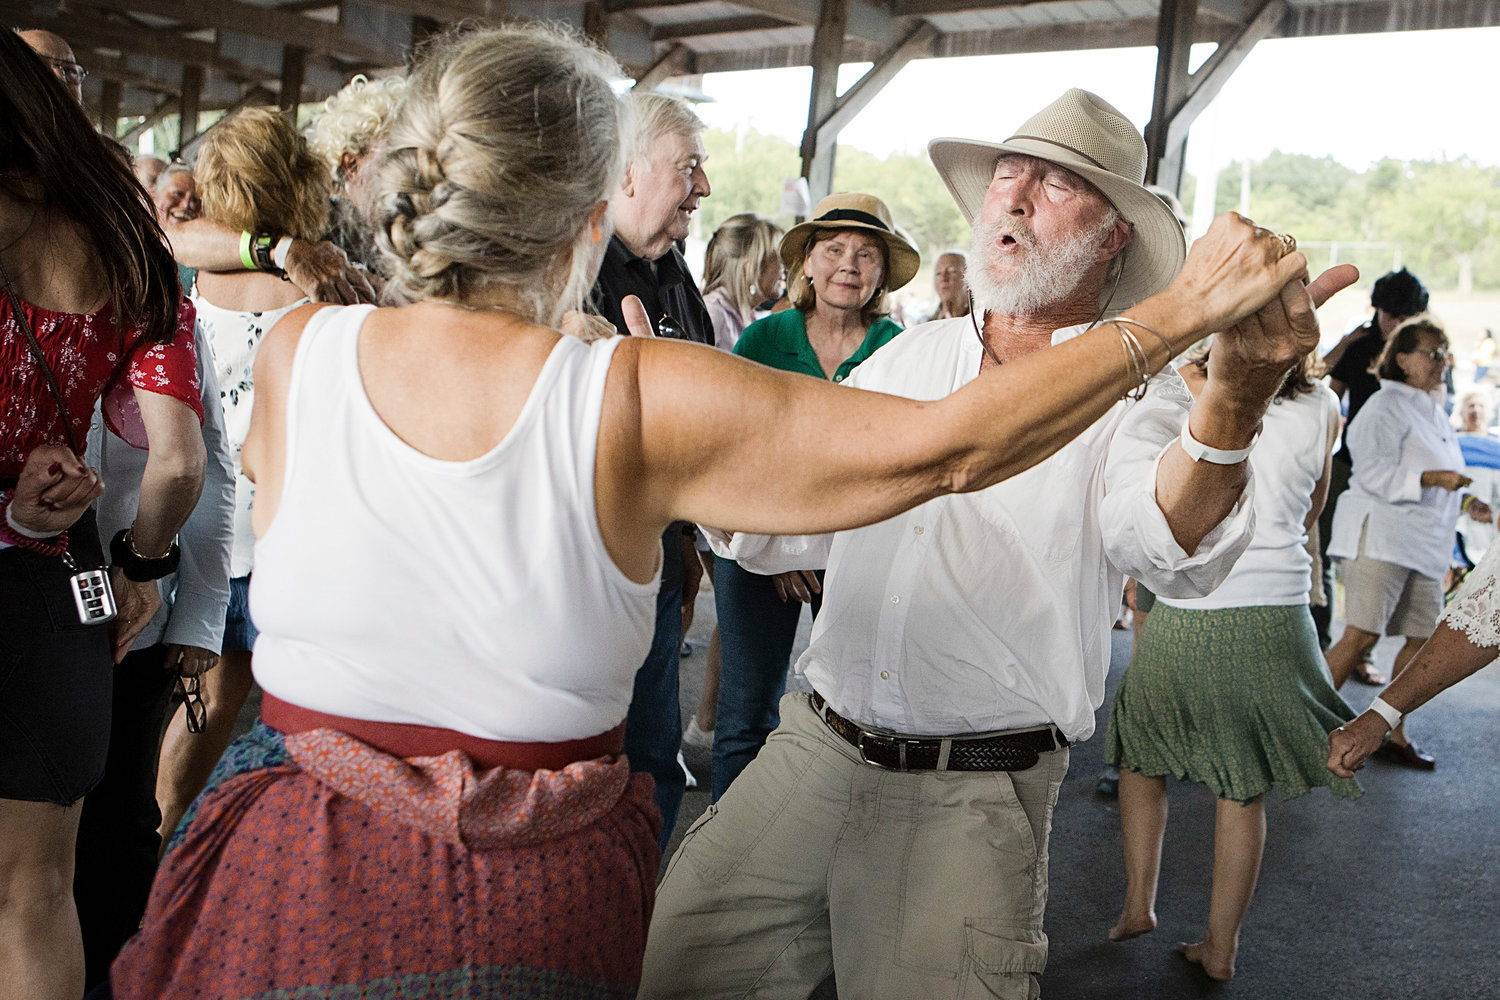 Wally Zembo and a friend dance the afternoon away as The Funky White Honkies lay down a groove at Saturday's Shellstock fund-raiser at the Westport Fairgrounds.